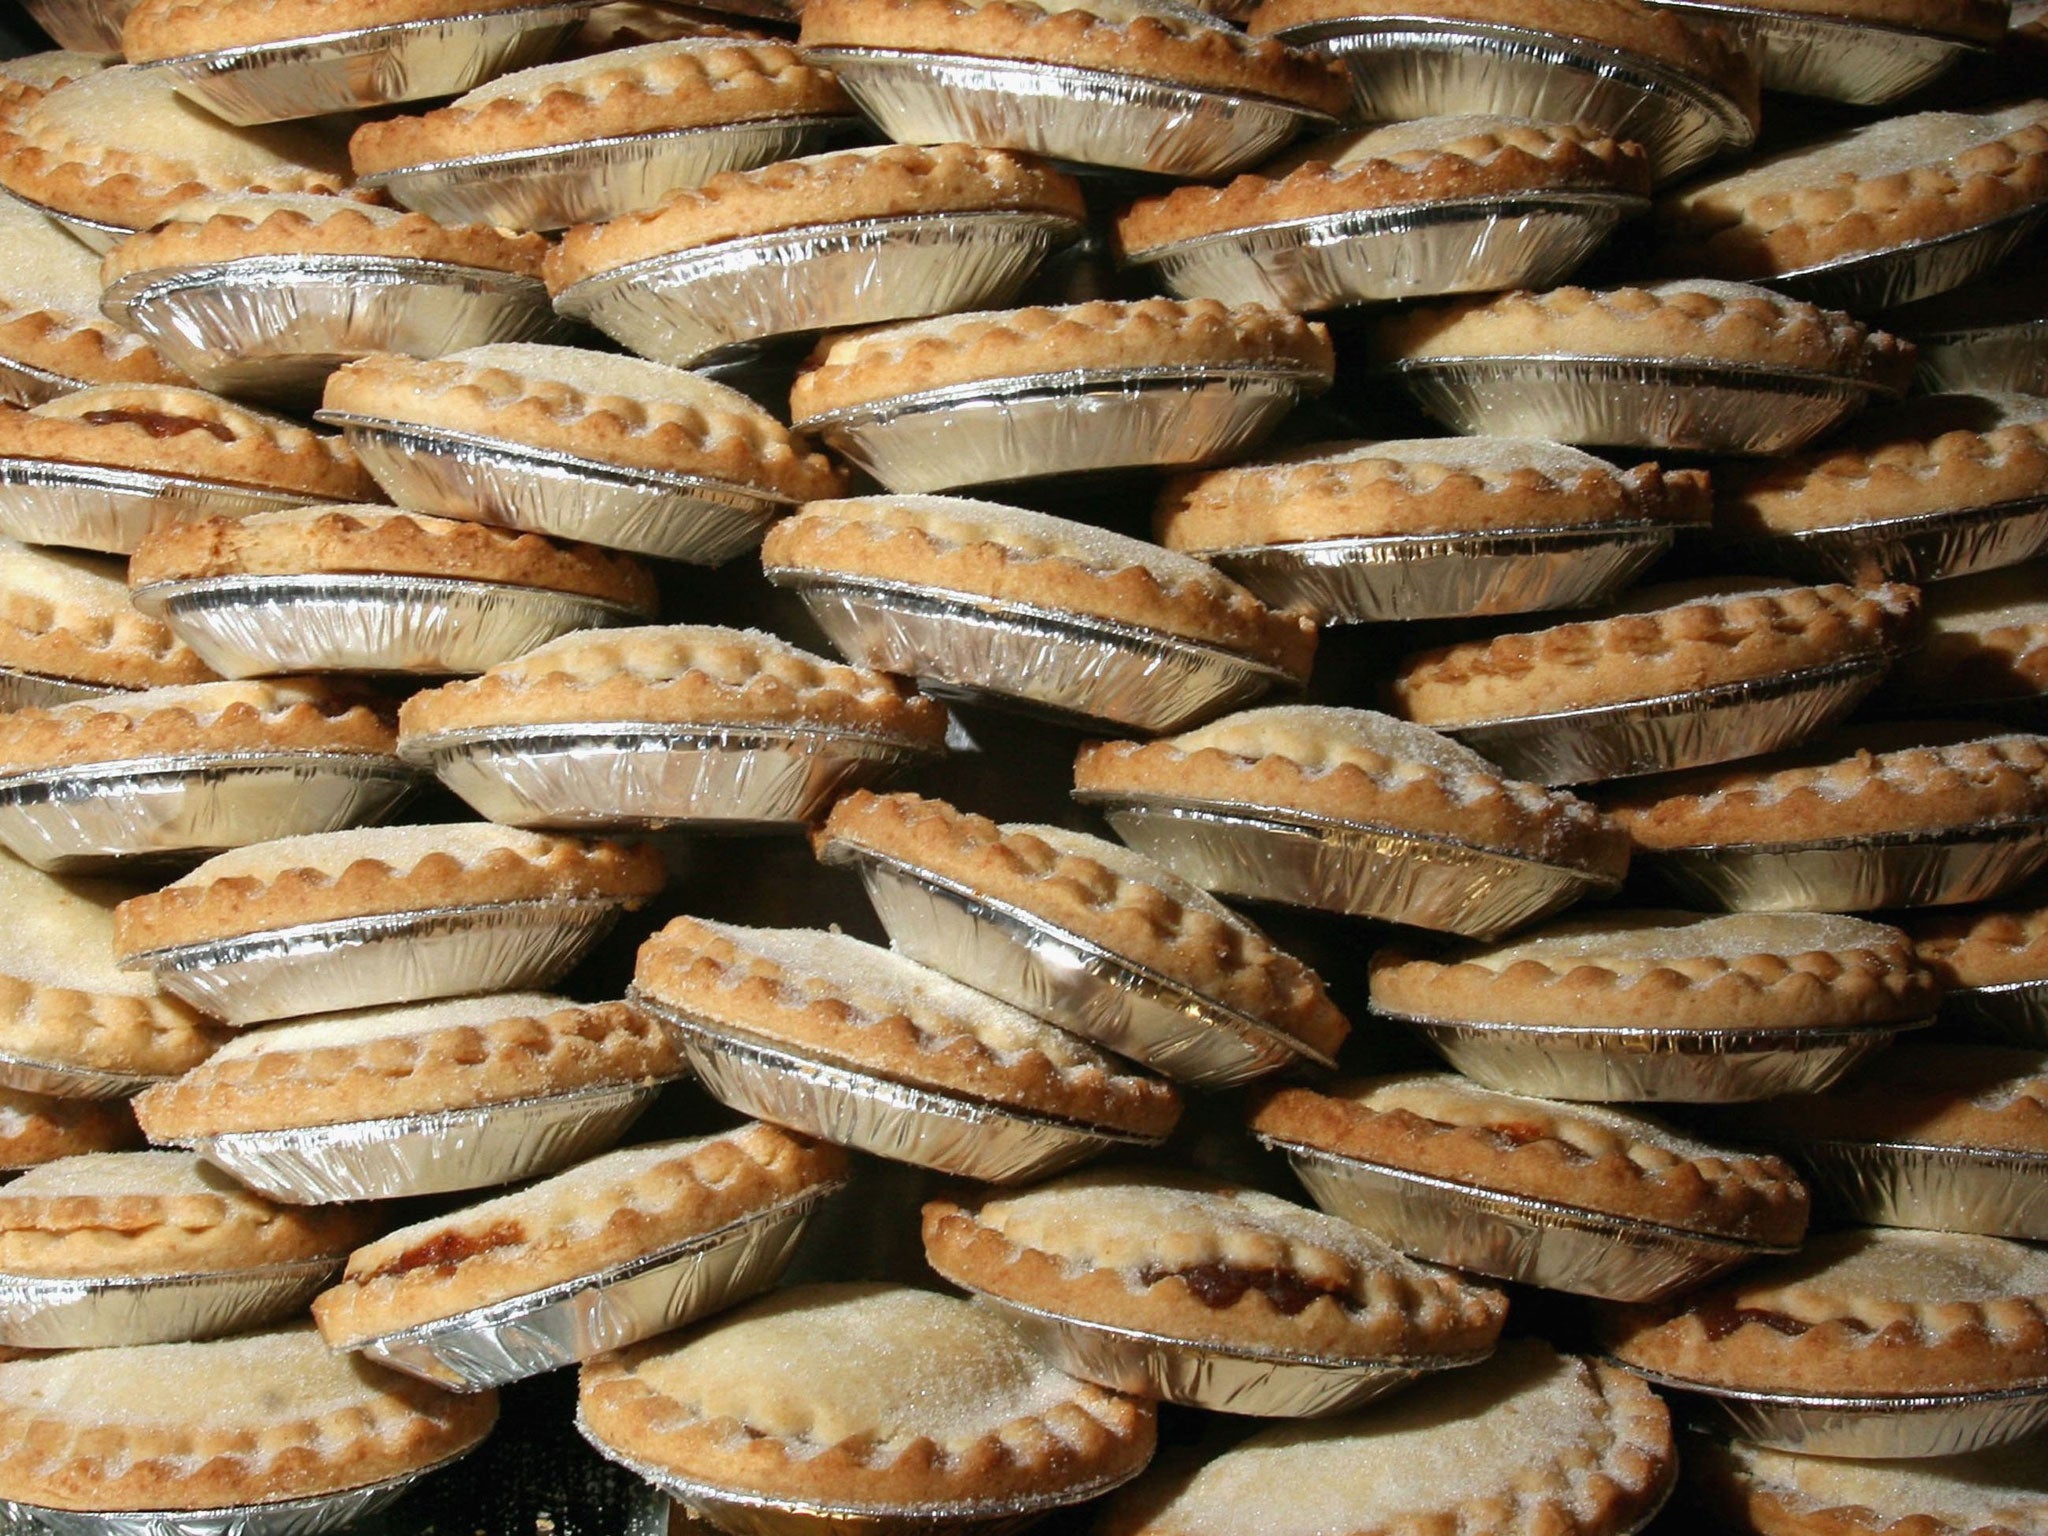 Mince pies wait to be eaten before the Wookey Hole Big Eat Mince Pie Eating Contest, at the Wookey Hole Show Caves on November 29, 2006